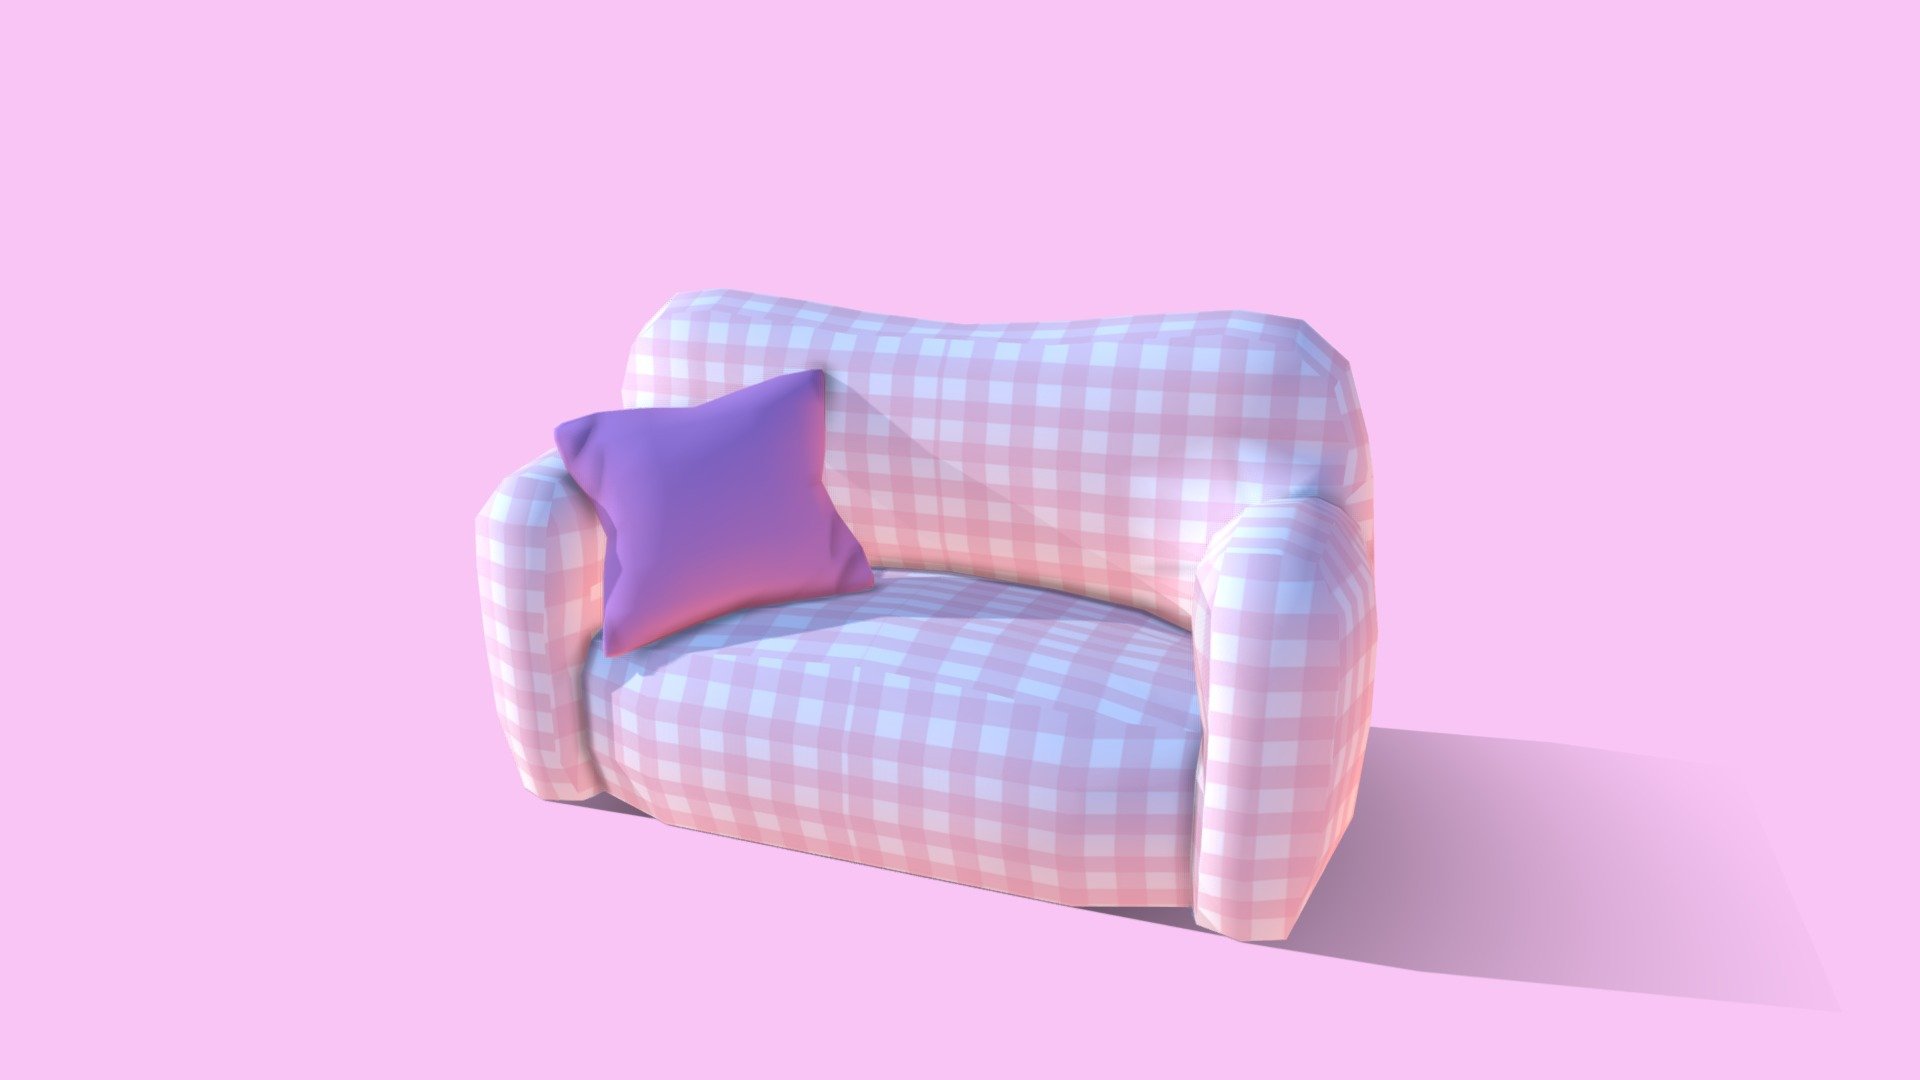 Lowpoly pink checkered couch!  A cute asset I created for an upcoming indie game my team is working on called Jelly Jam! - Cute Checkered Couch - 3D model by Danielle W. (@dpandaheart) 3d model